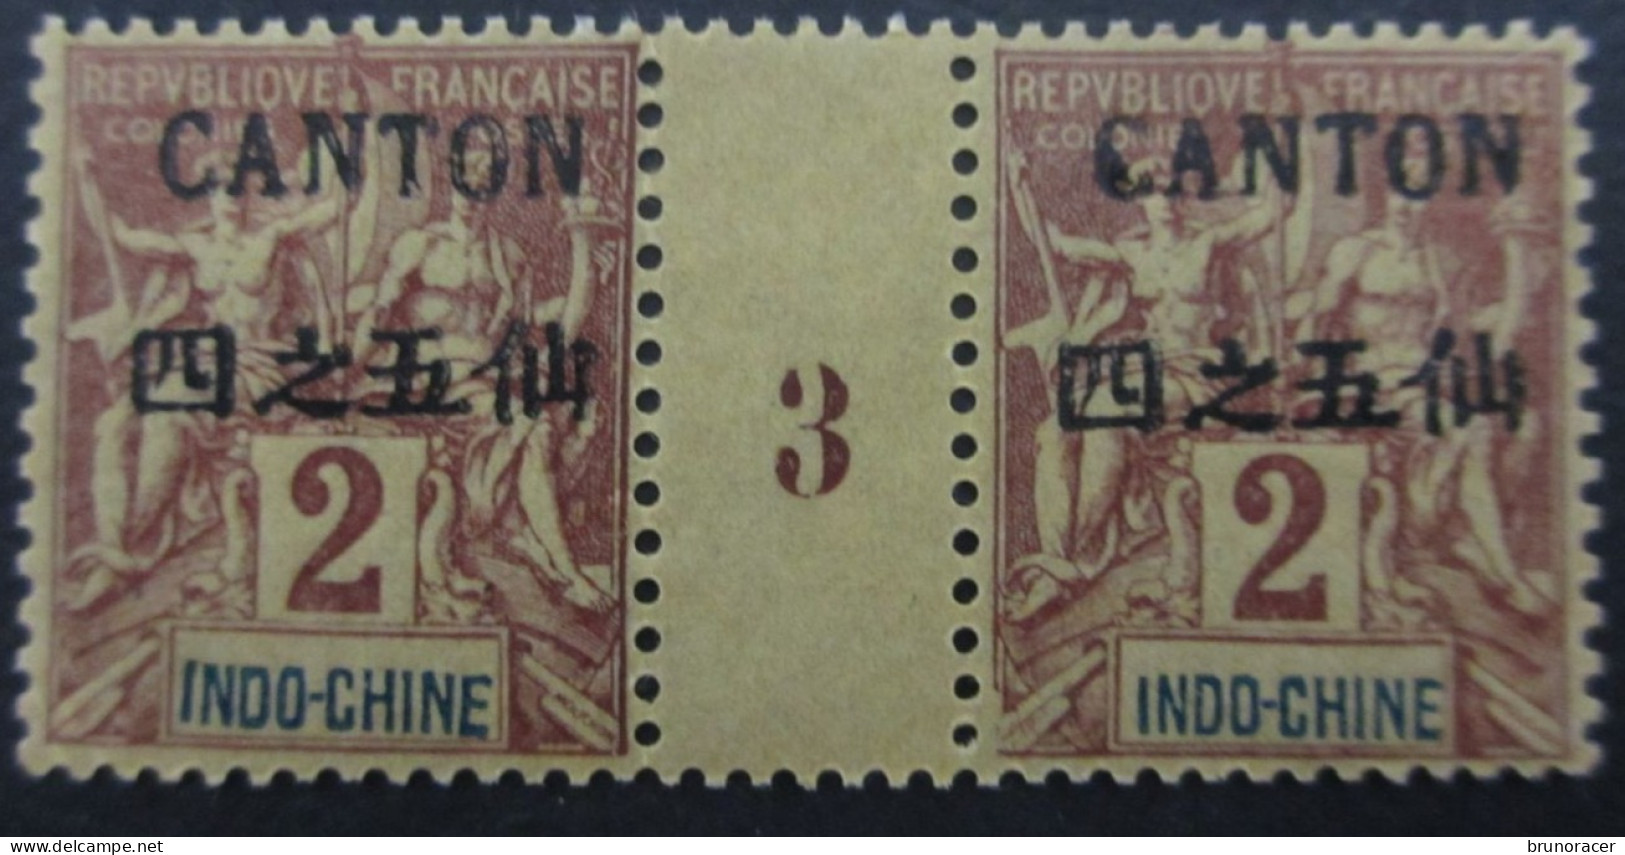 CANTON Bx INDOCHINOIS PAIRE MILLESIME N°18 NEUF** TB COTE 55 EUROS VOIR SCANS - Unused Stamps